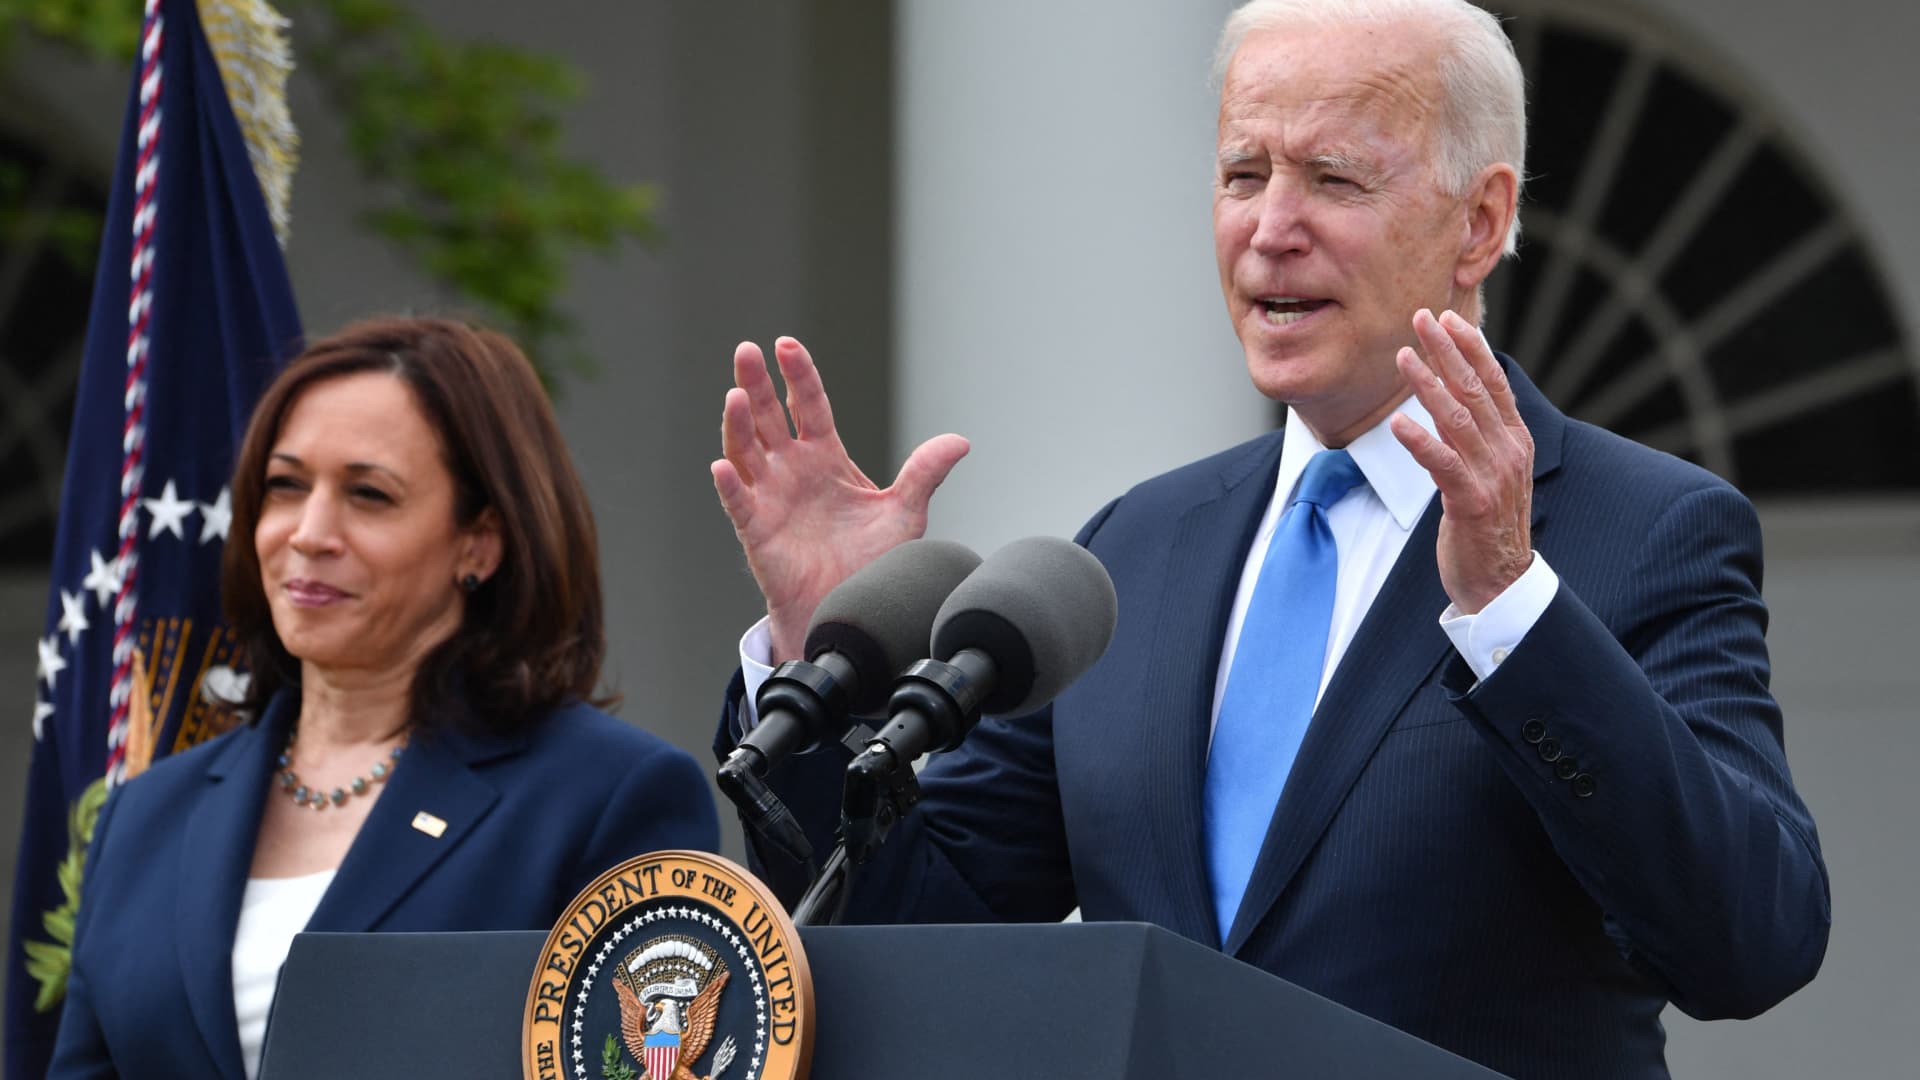 US Vice President Kamala Harris looks on as US President Joe Biden delivers remarks on Covid-19 response and the vaccination program, from the Rose Garden of the White House, Washington, DC on May 13, 2021.